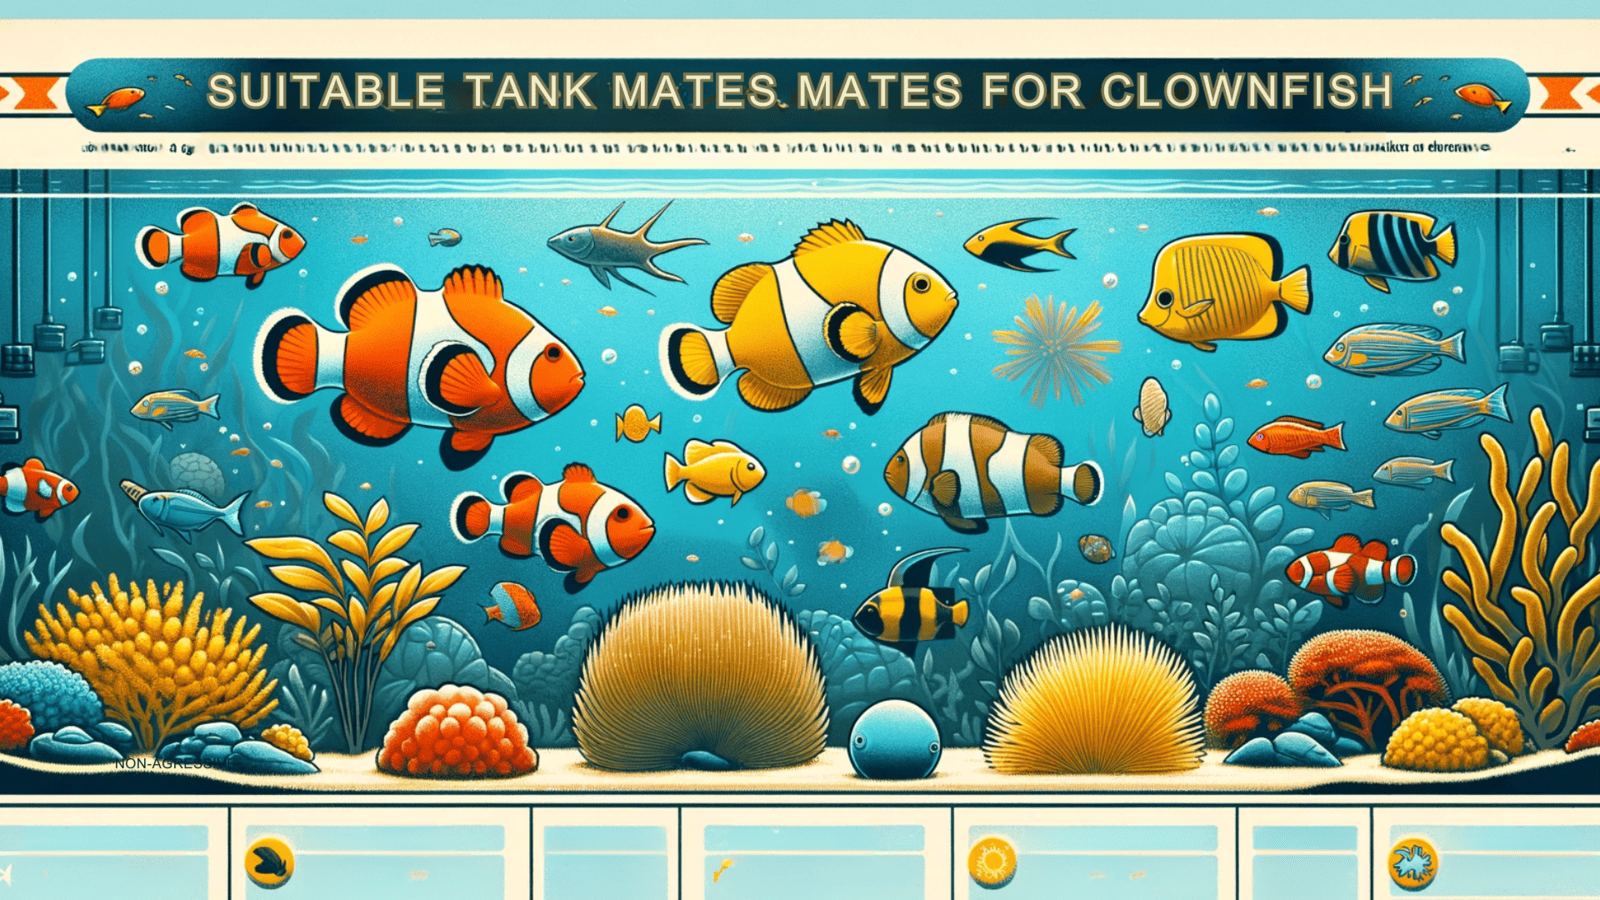 Suitable Tank Mates for Clownfish